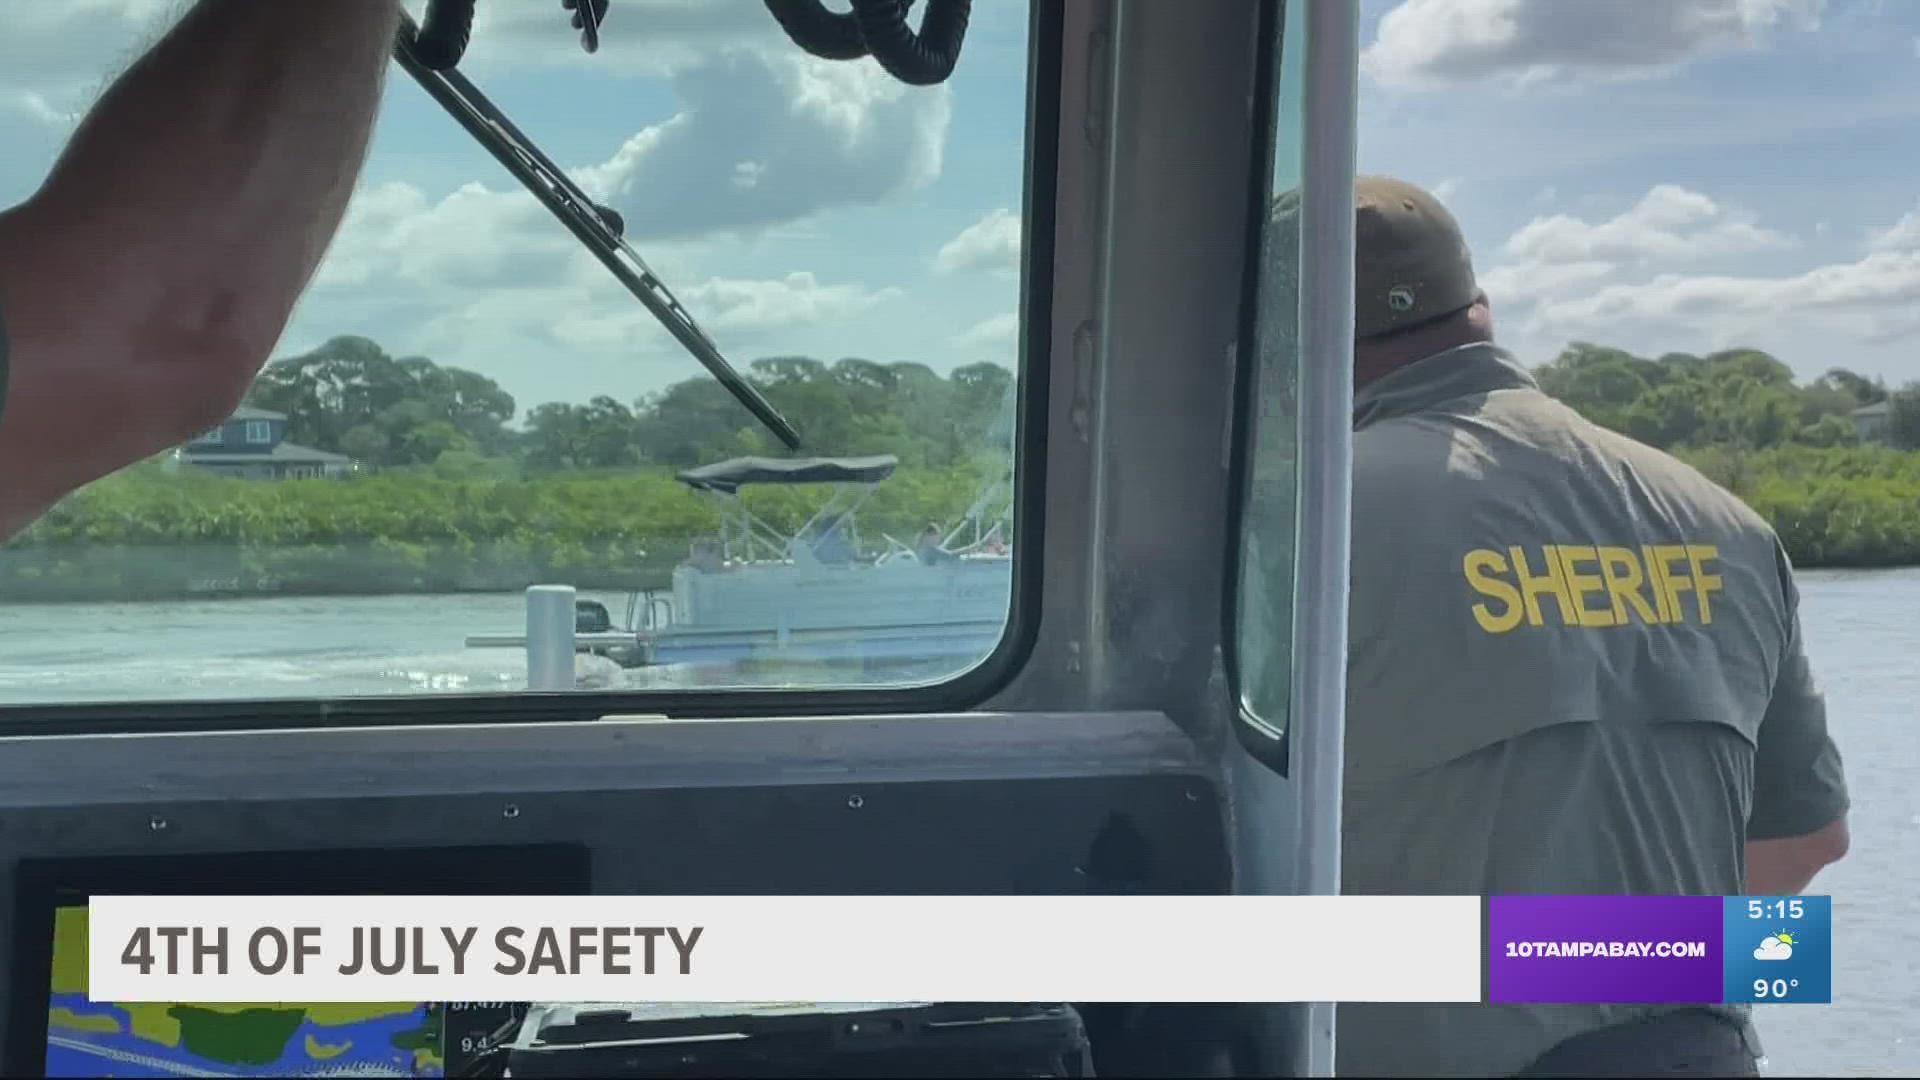 Florida Fish and Wildlife, the U.S. Coast Guard and the Pinellas County Sheriff’s Office will be out on the waterways in force this holiday weekend.